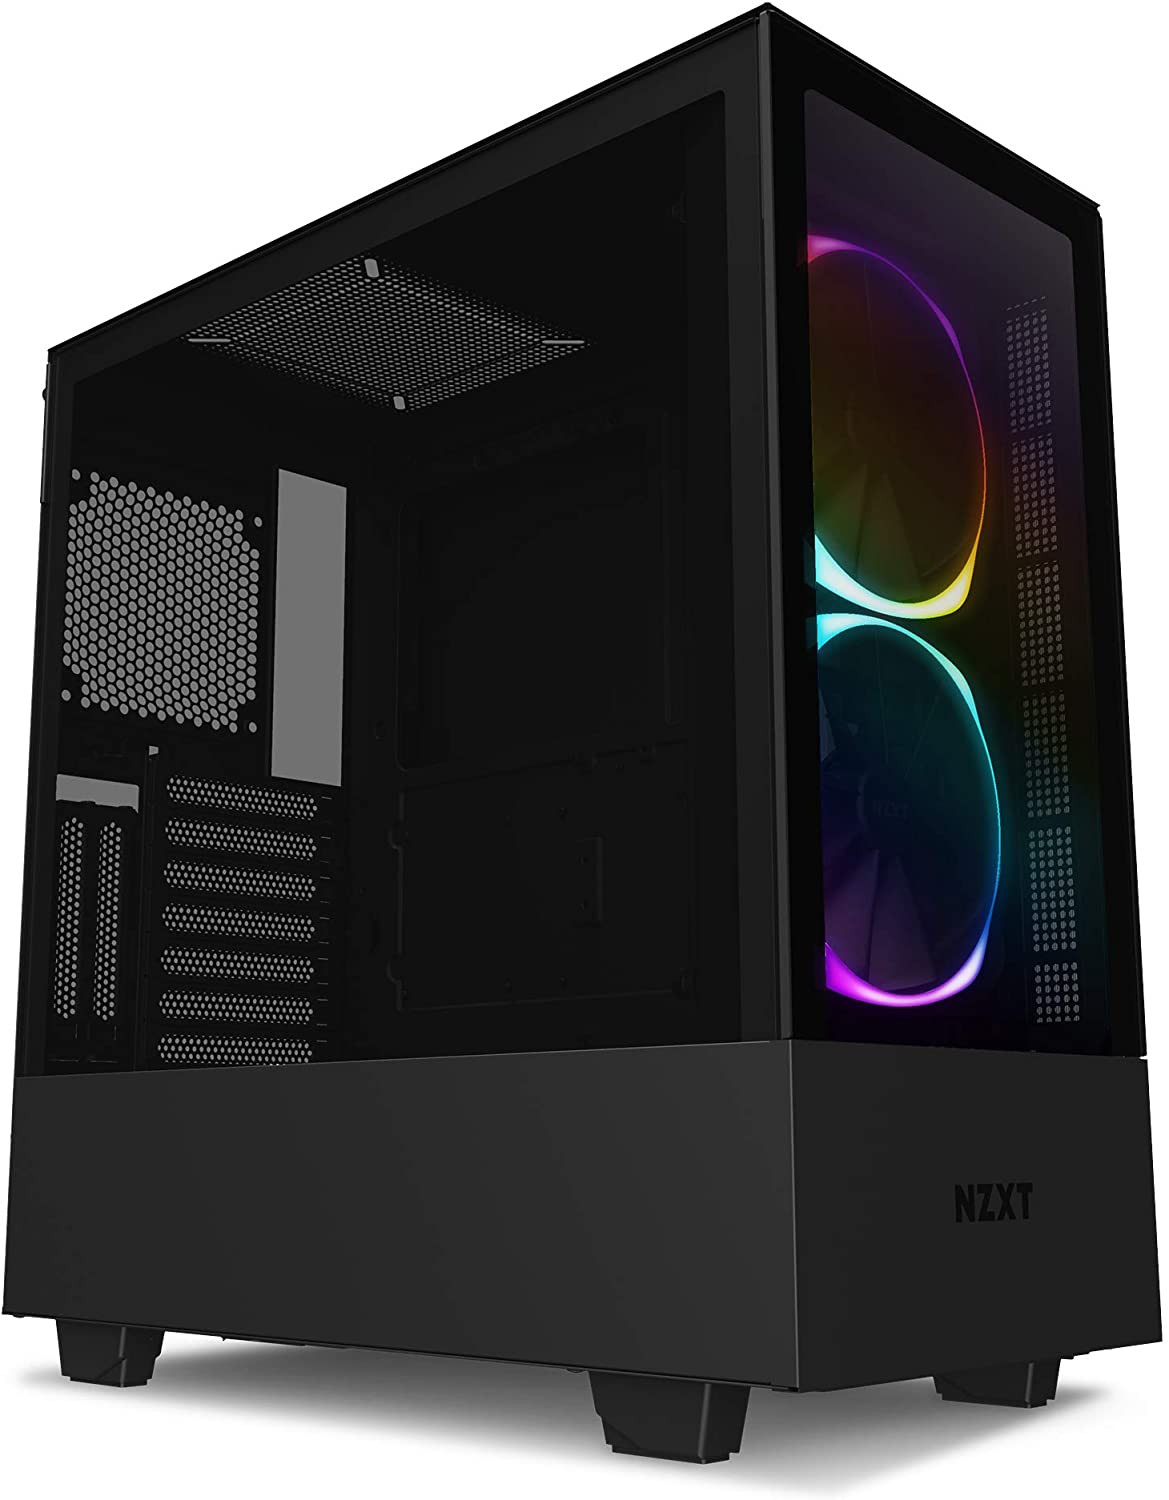 Nzxt H510 Elite Atx Case Pc Gaming Computer Case | CLOUD HOT GIRL